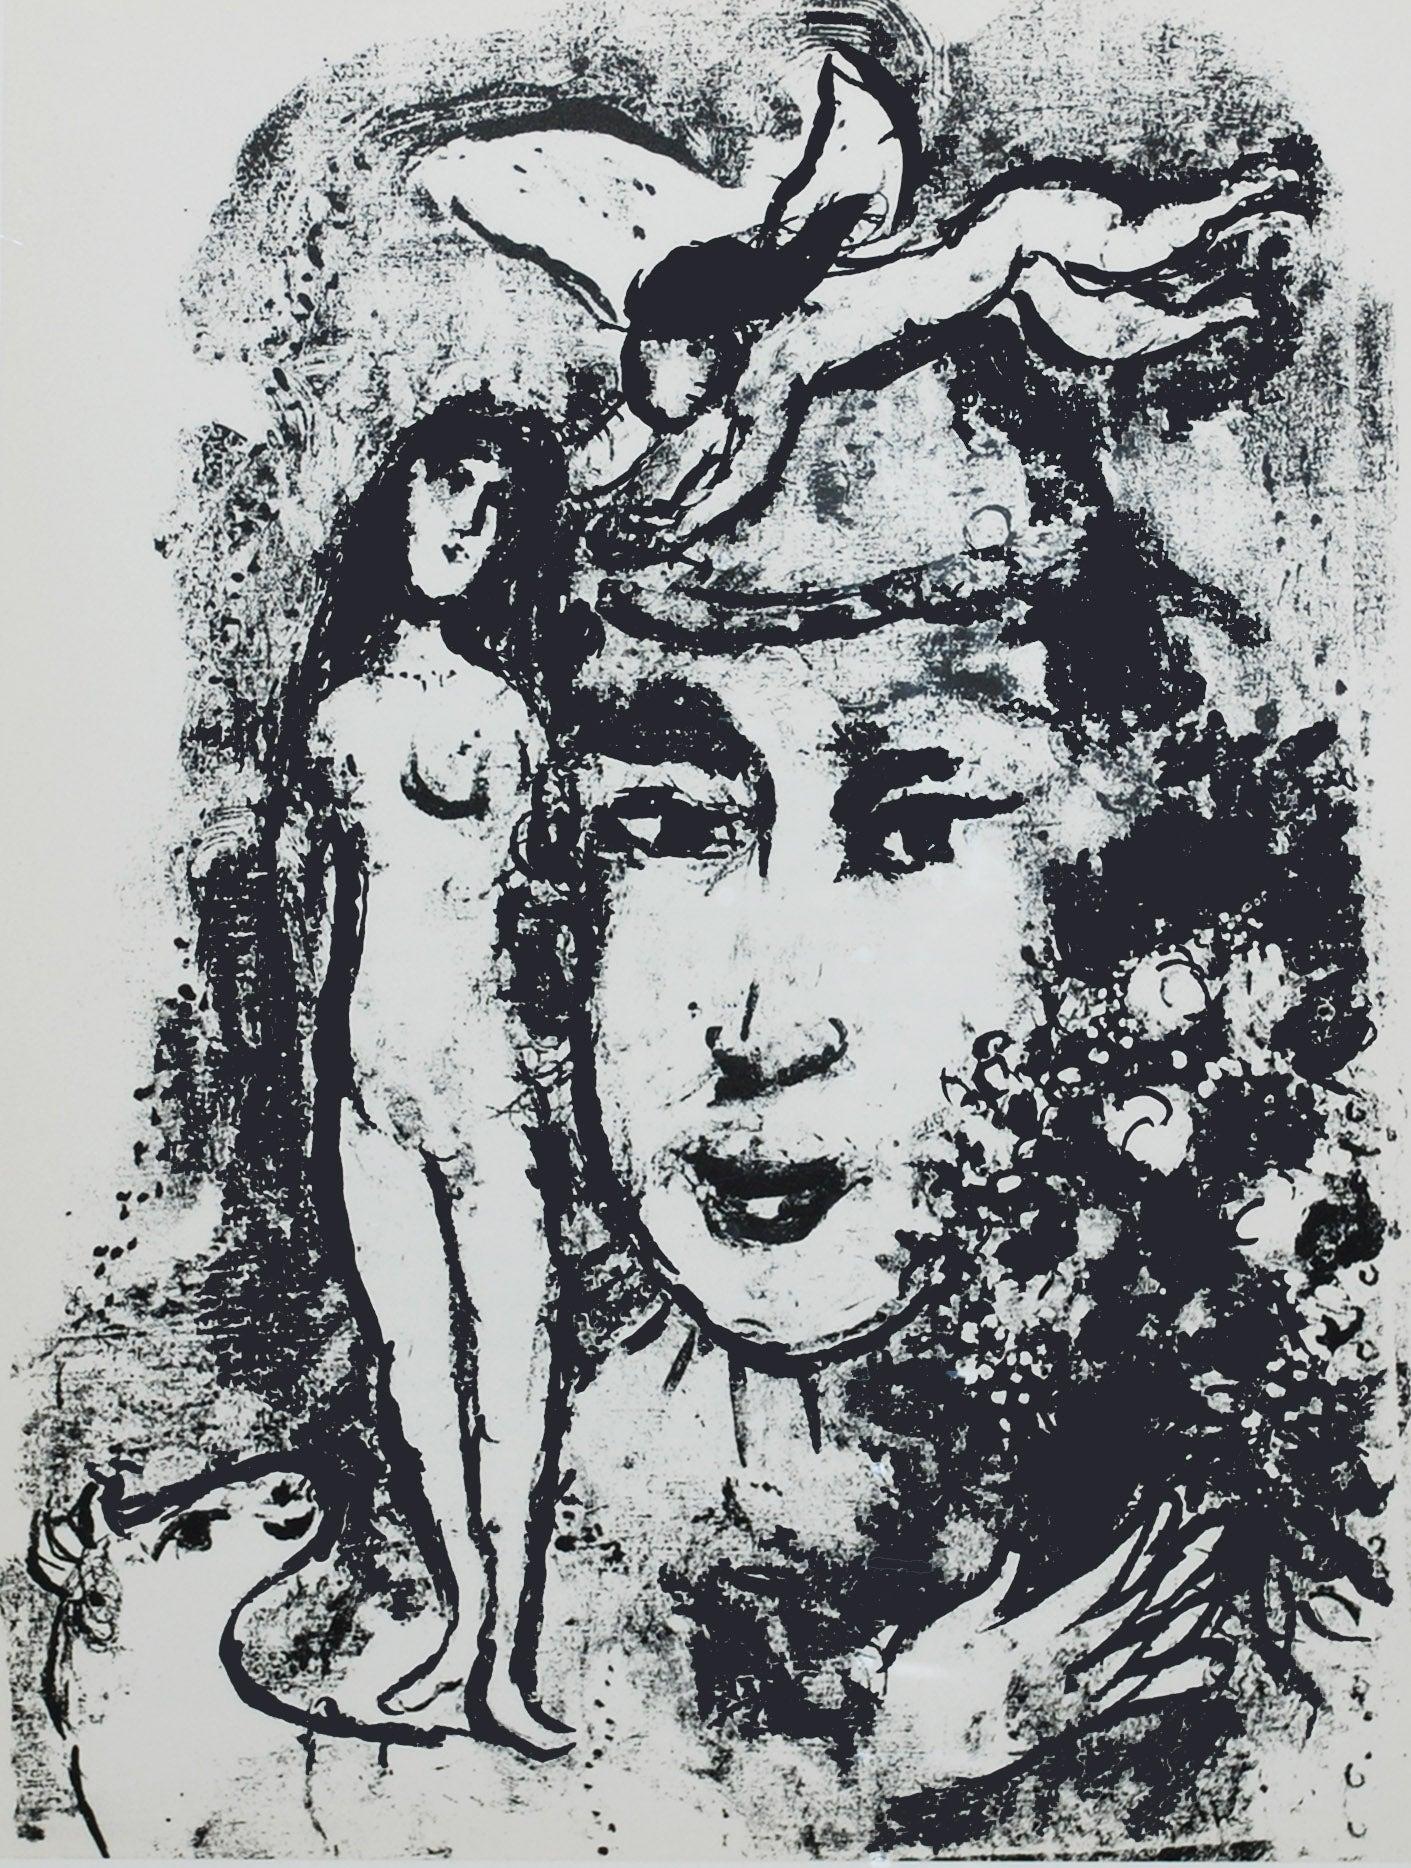 Artist: Marc Chagall
Title: The White Clown
Portfolio: Derriere Le Miroir 147
Medium: Lithograph
Year: 1964
Edition: Unnumbered
Framed Size: 21 1/4" x 17 1/4"
Sheet Size: 15" x 11"
Signature: Unsigned
Reference: Cramer 59, Mourlot 411